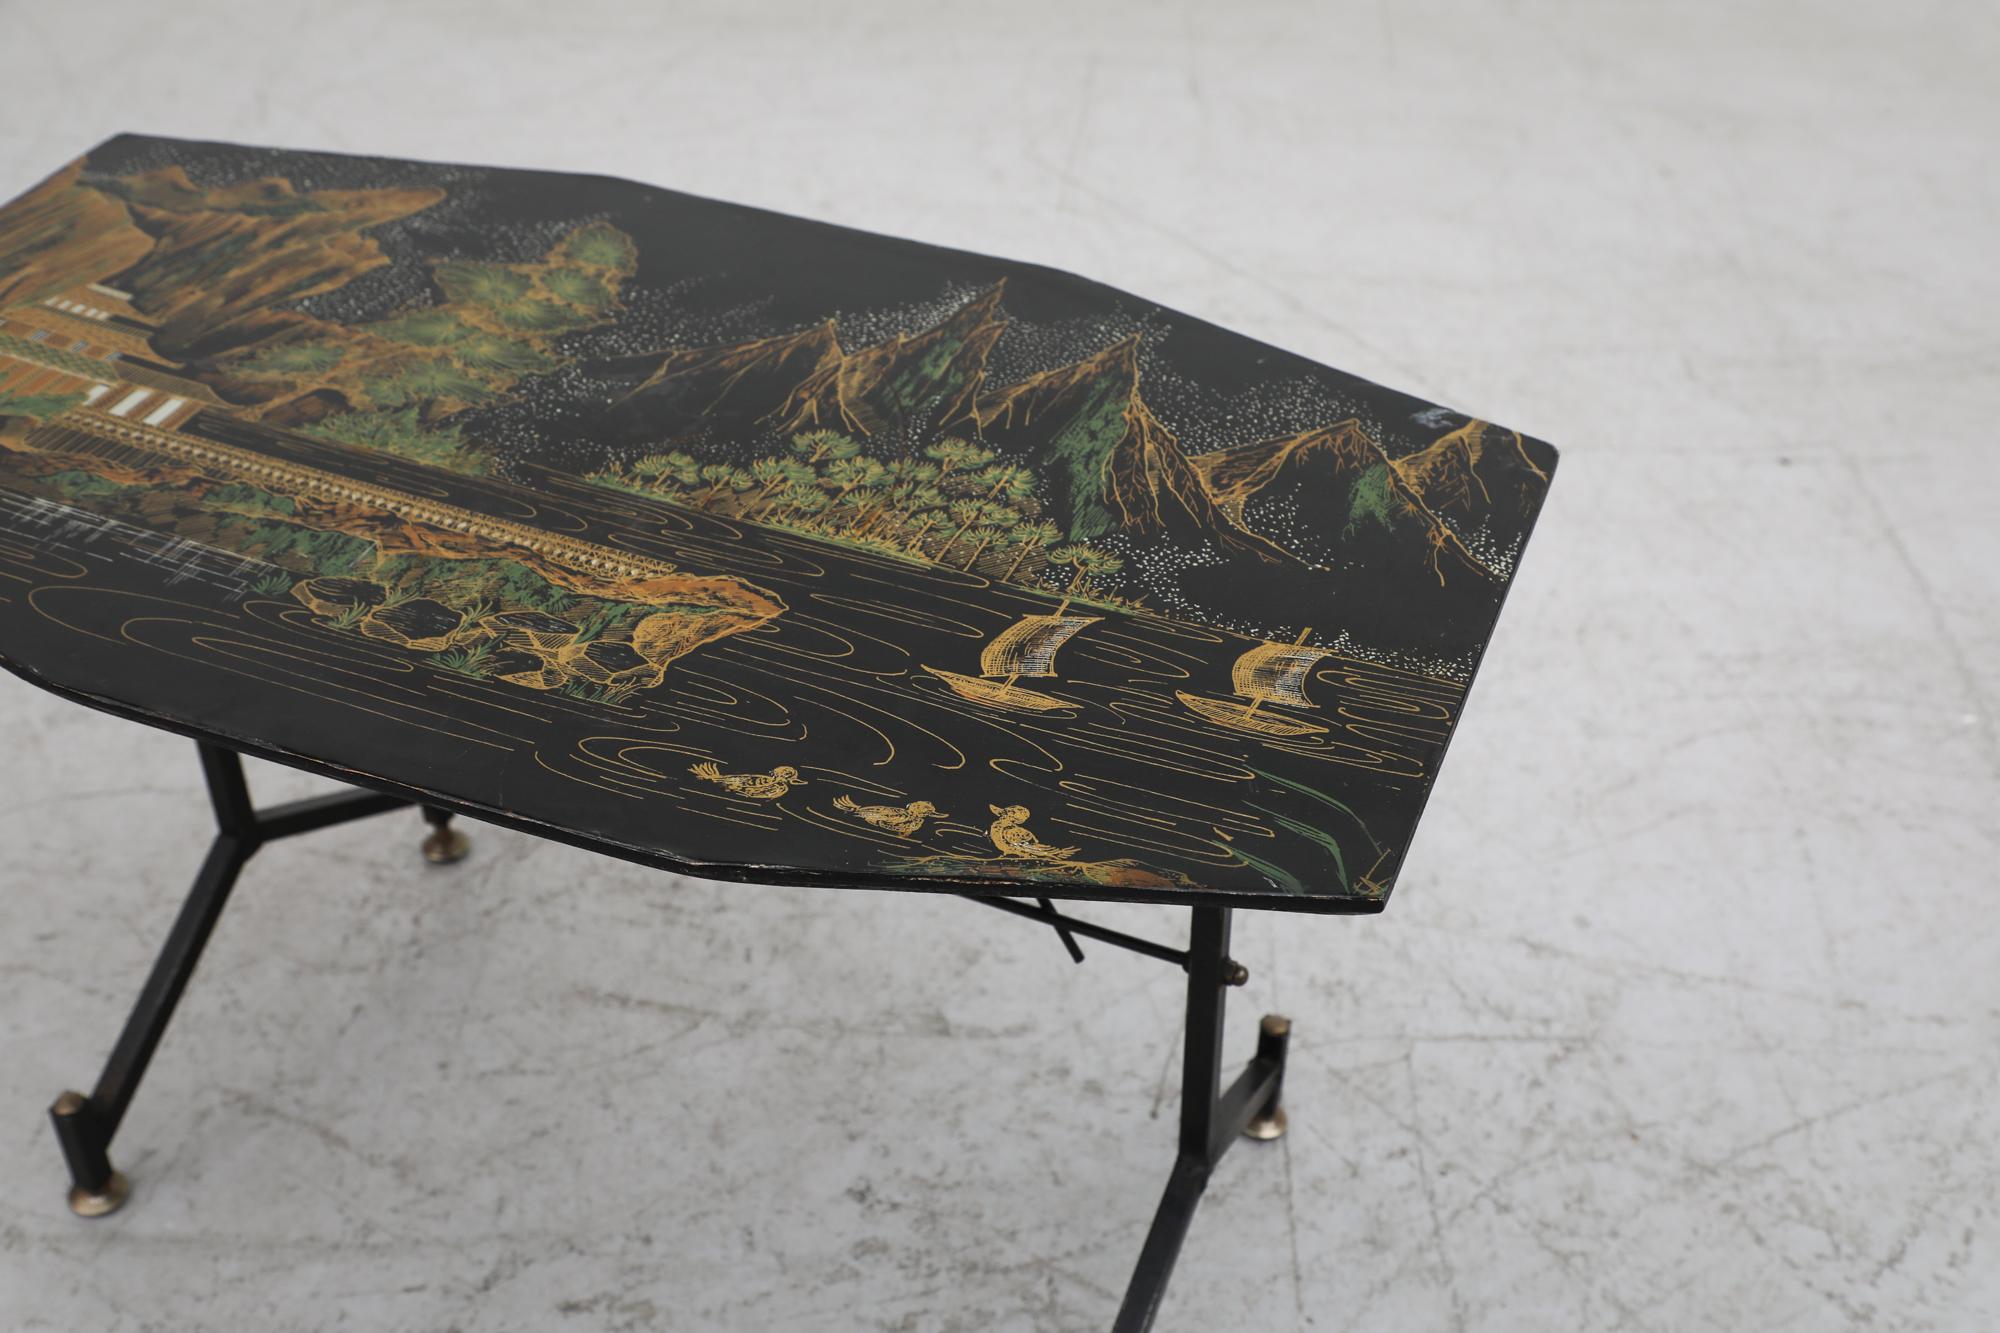 Borsani Inspired Chinese Scenery Hand-Painted Side Table with Black Metal Frame 1